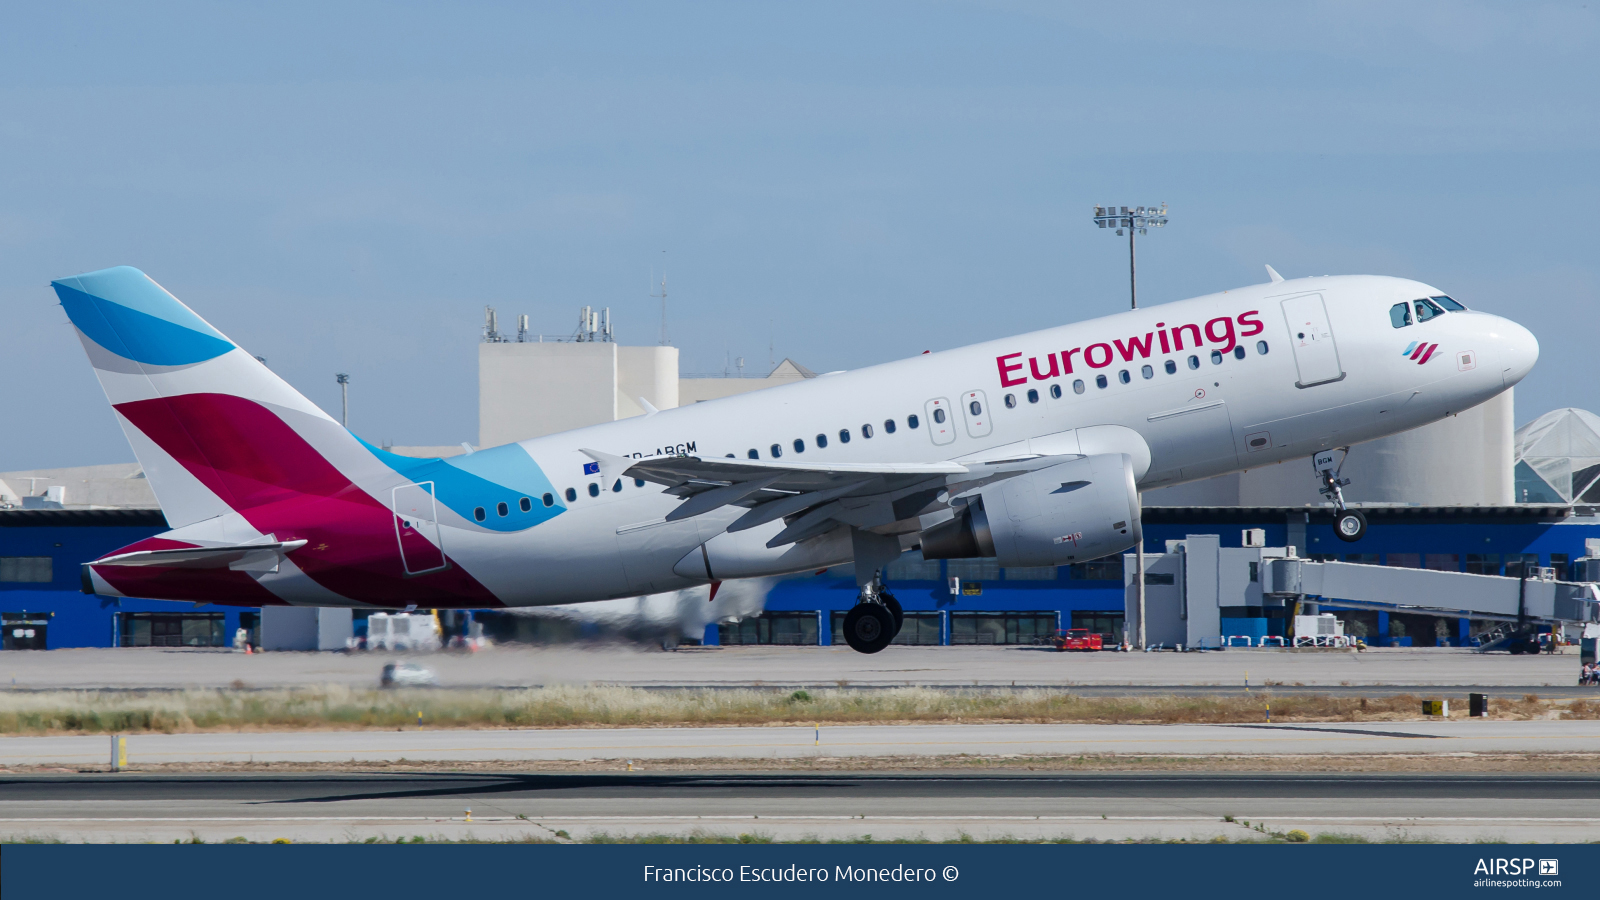 Eurowings  Airbus A319  D-ABGM